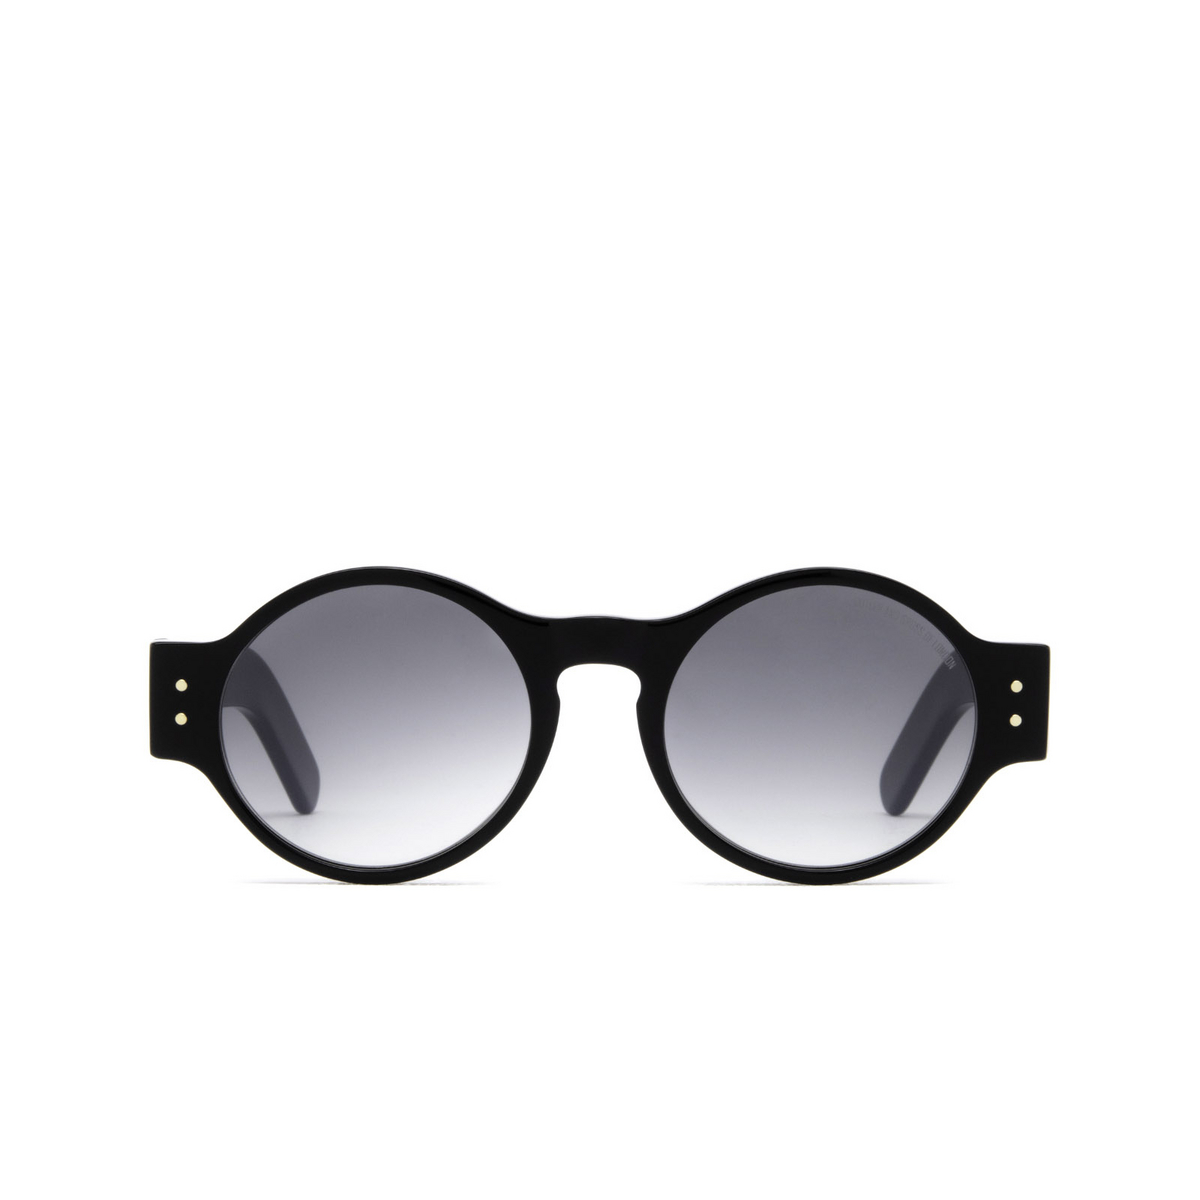 Cutler and Gross 1374 Sunglasses 01 Black - front view